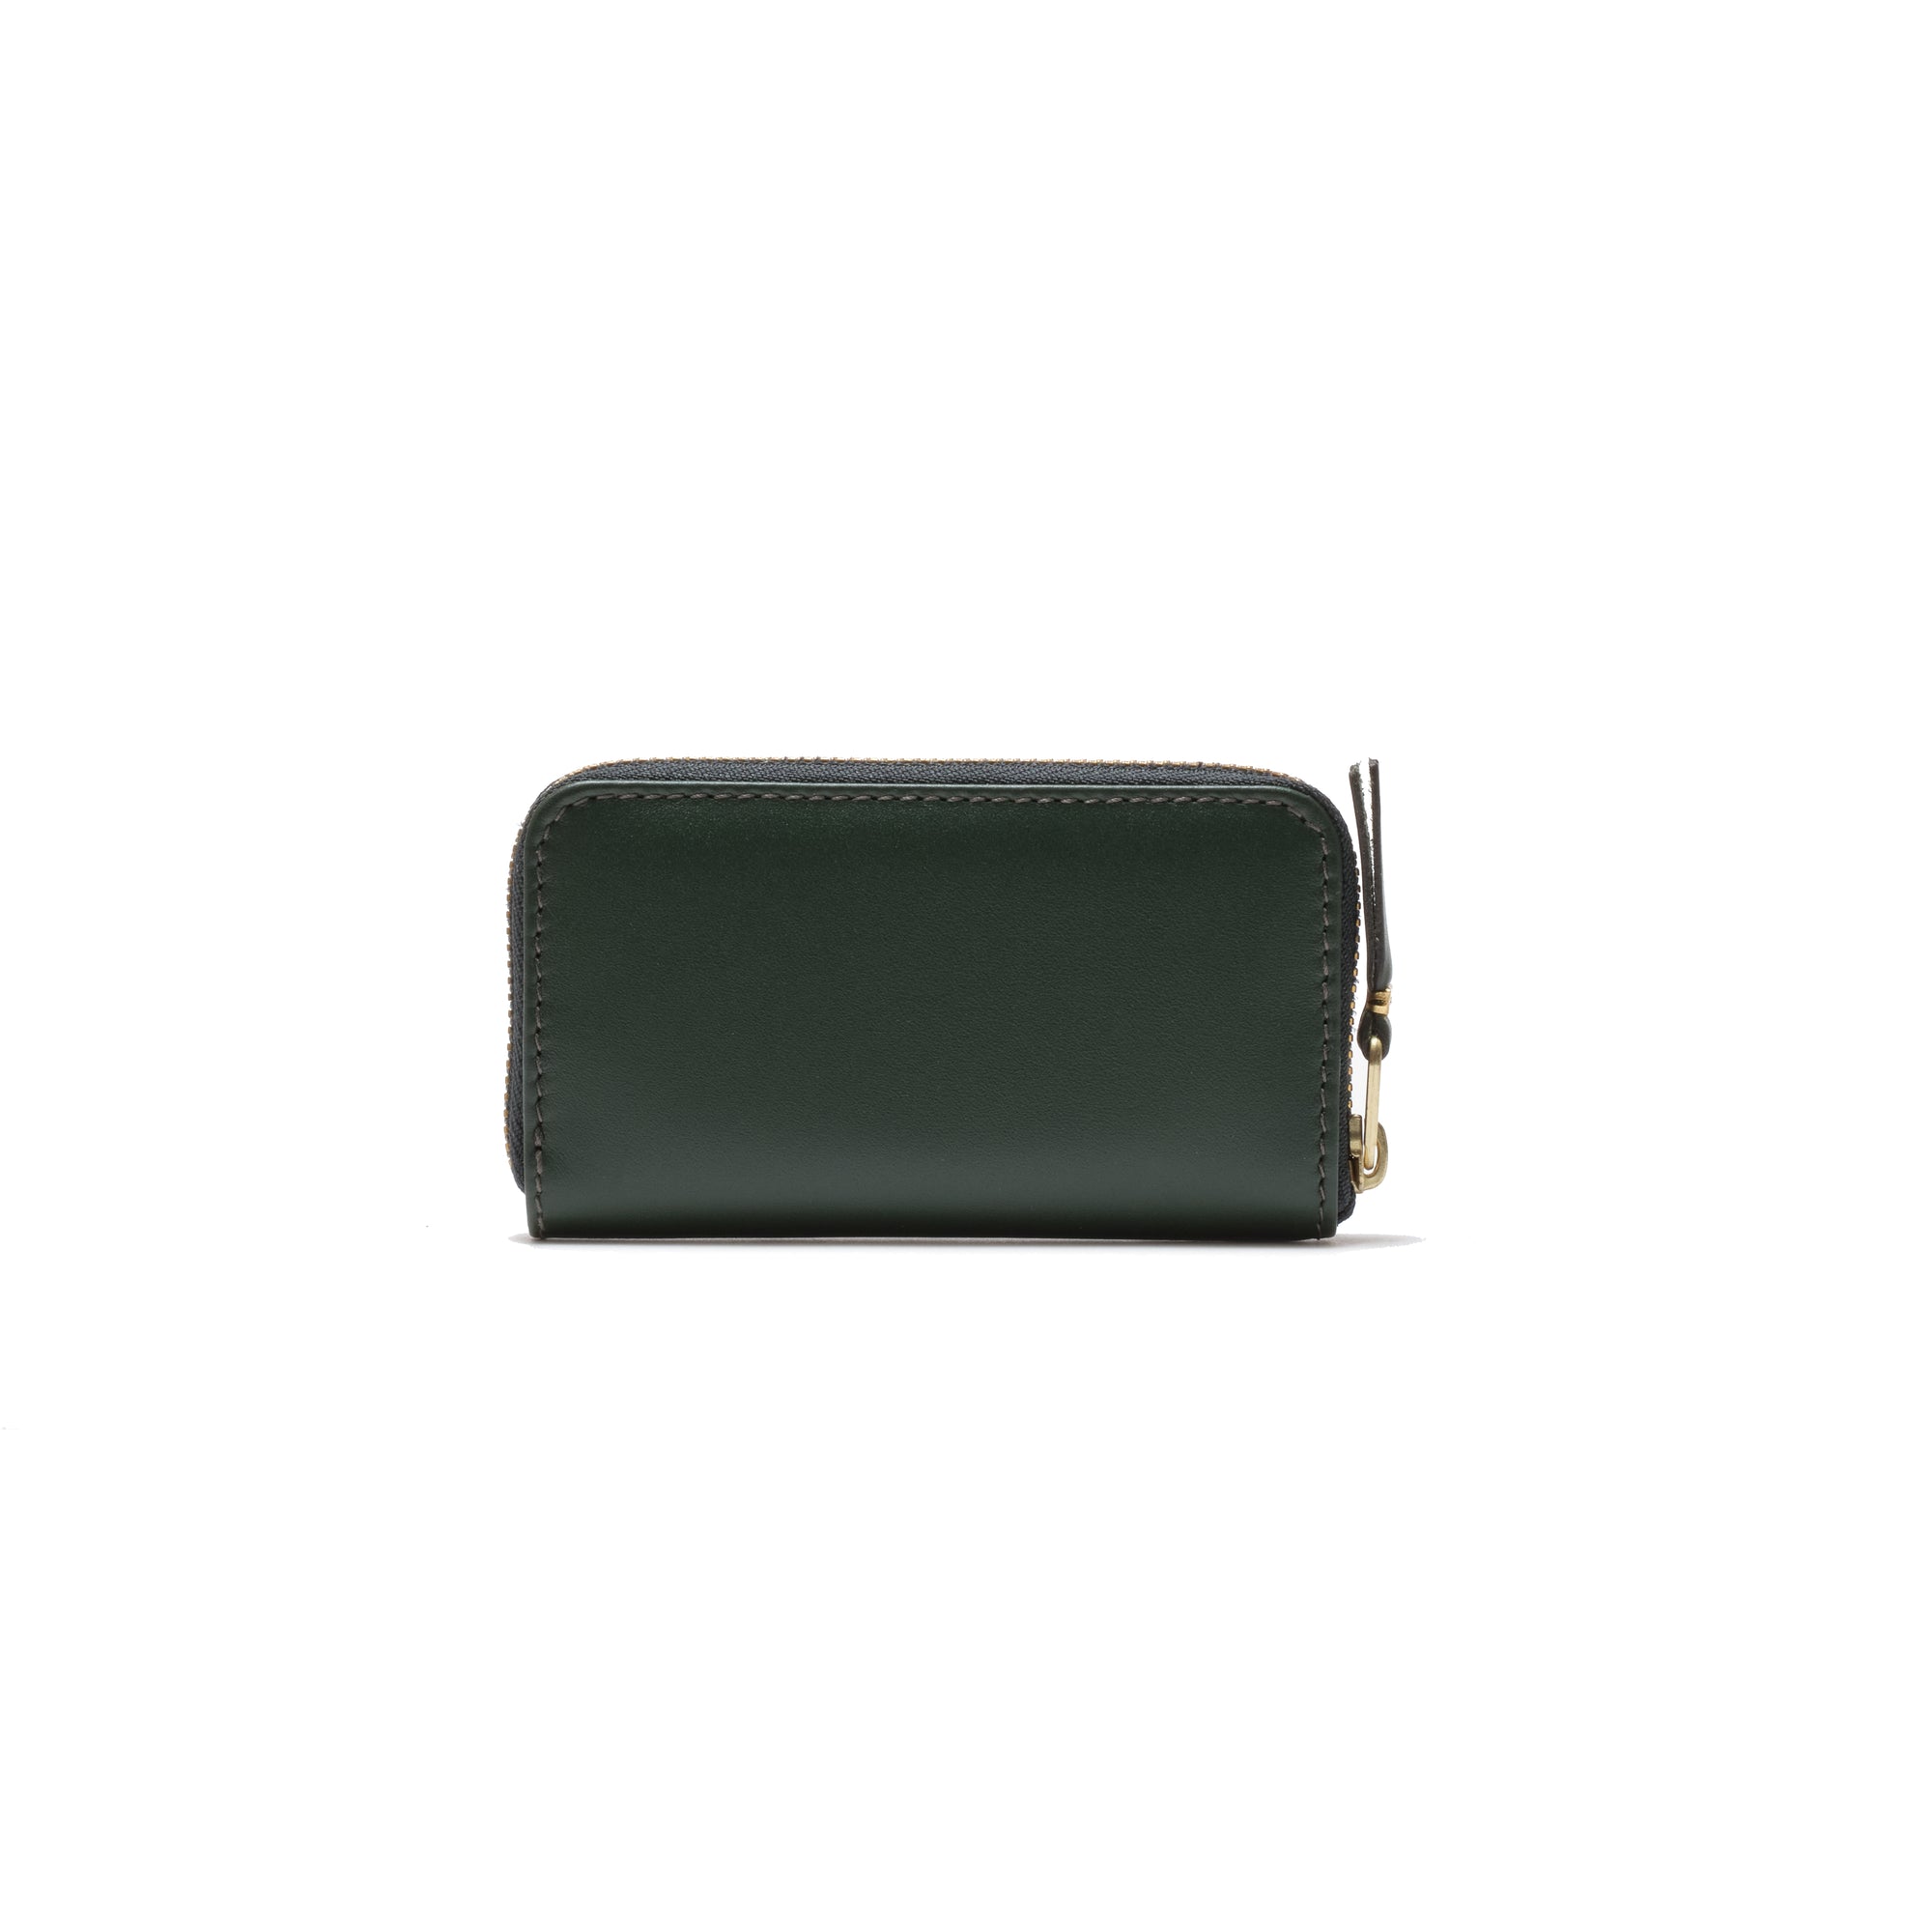 CDG WALLET - Classic Leather Line-8Z-D004 - (Bottle Green) view 2